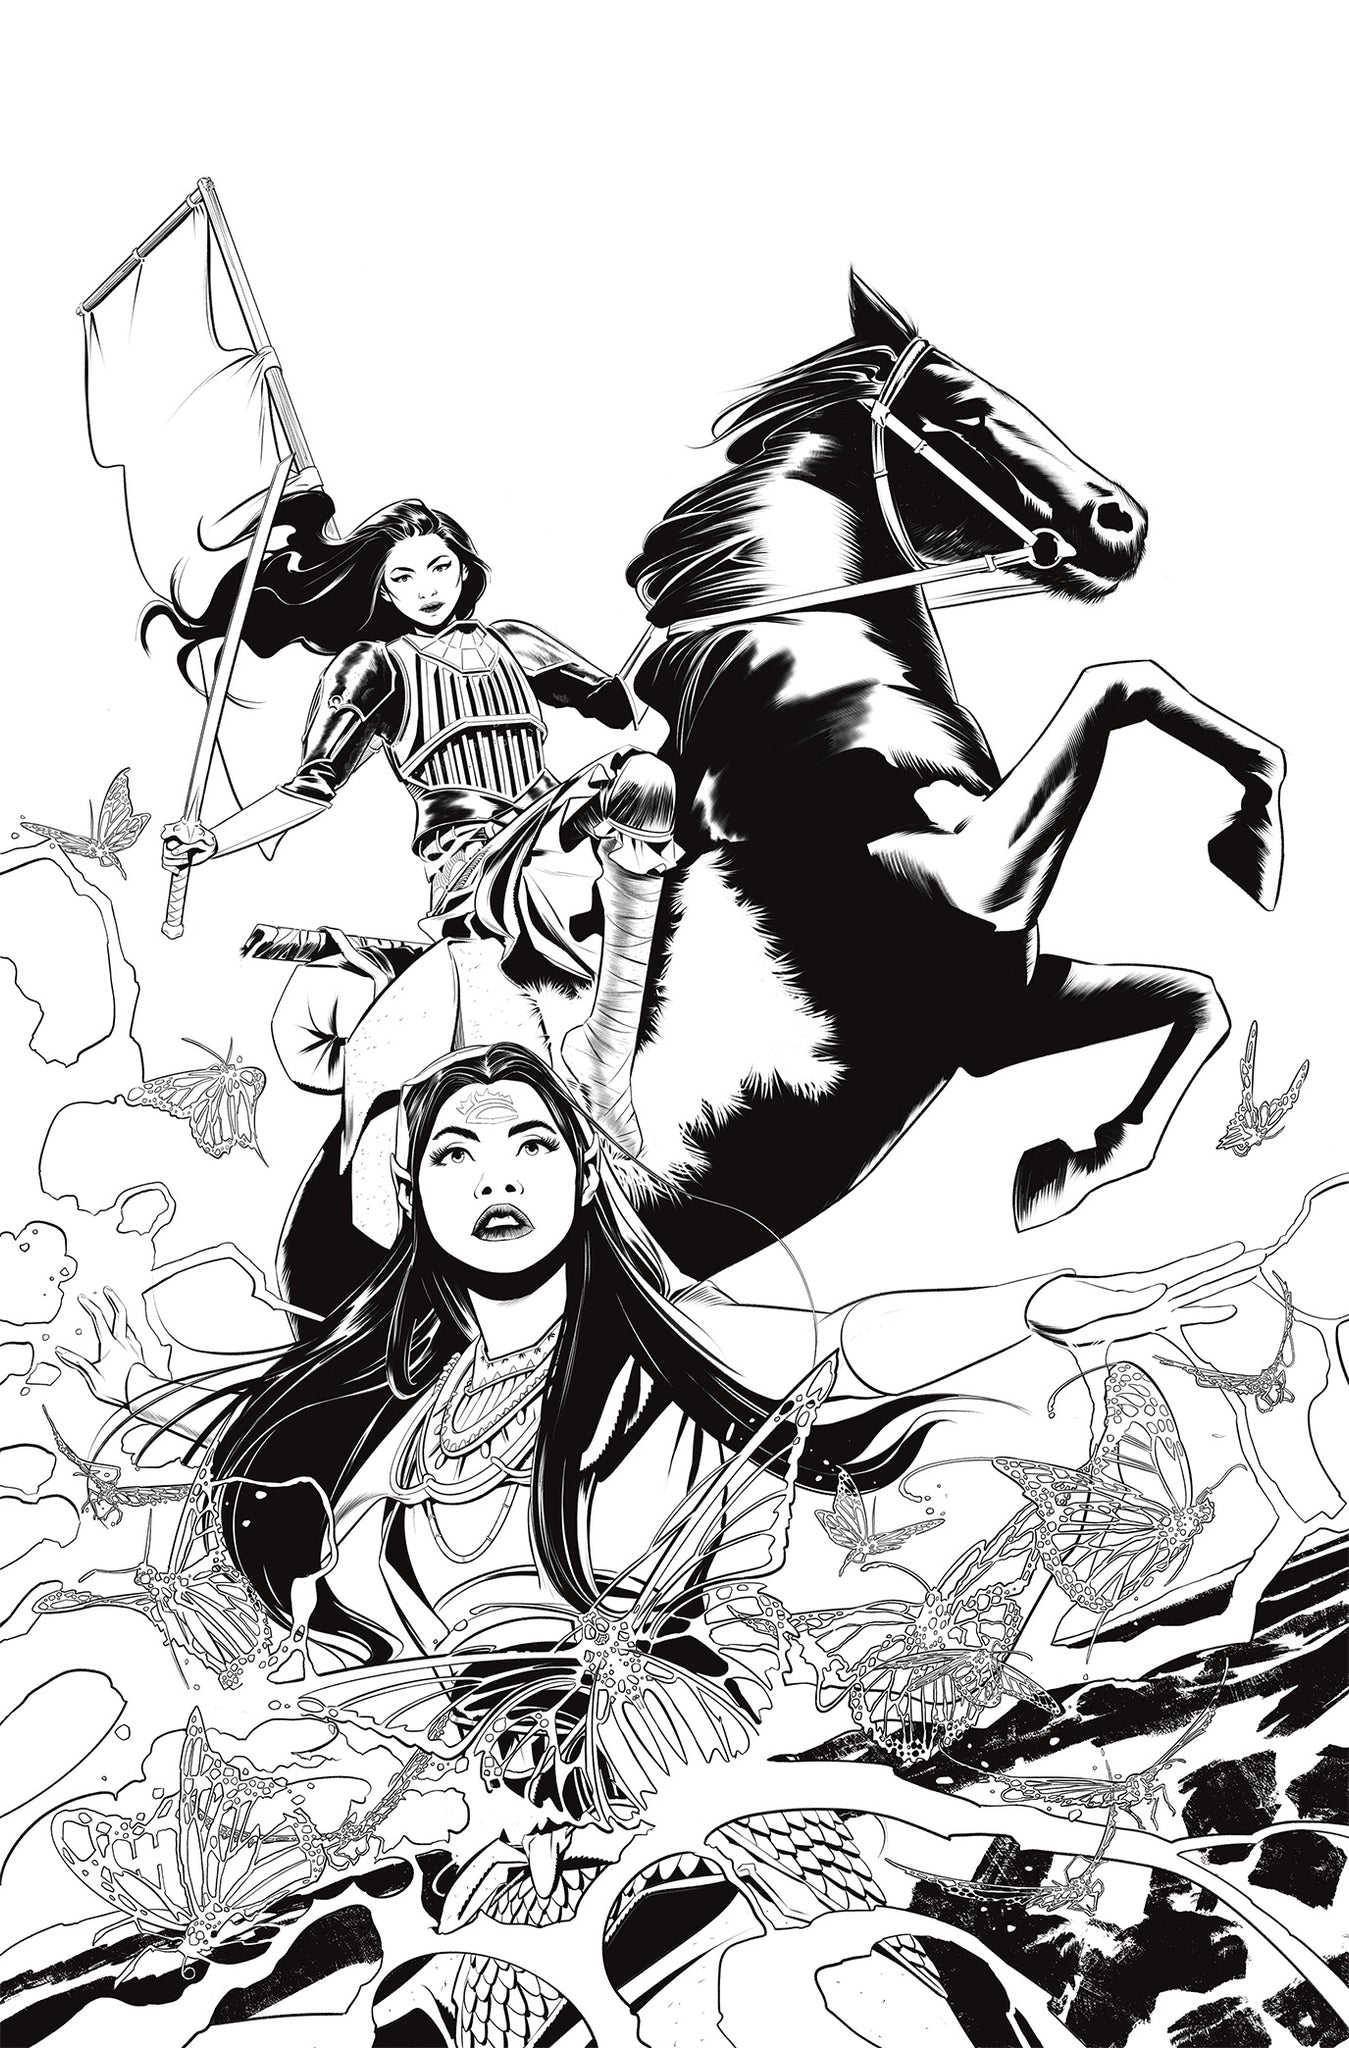 DECEMBER MYSTERY BOX w/Tales of Asunda #5 Mashae Patreon Exclusive Inks Preview